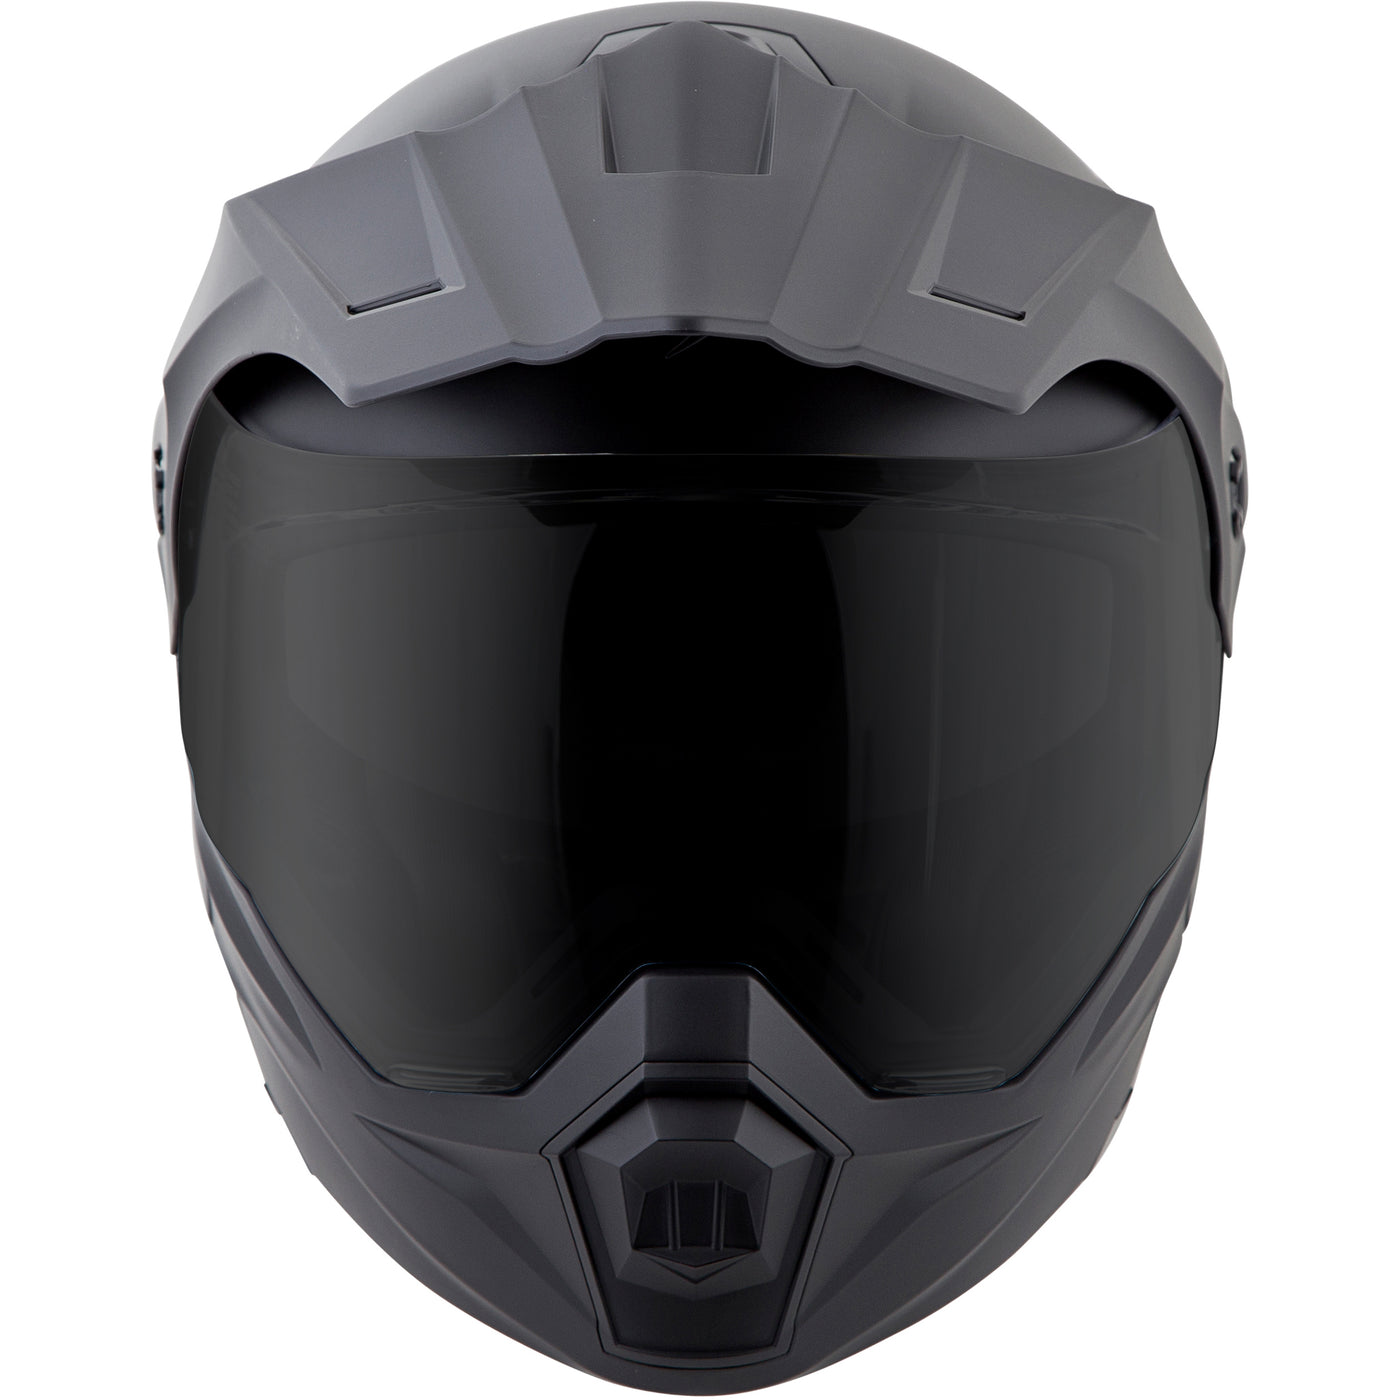 SCORPION EXO EXO-AT950 Cold Weather Solid Helmet w/Dual Pane Shield